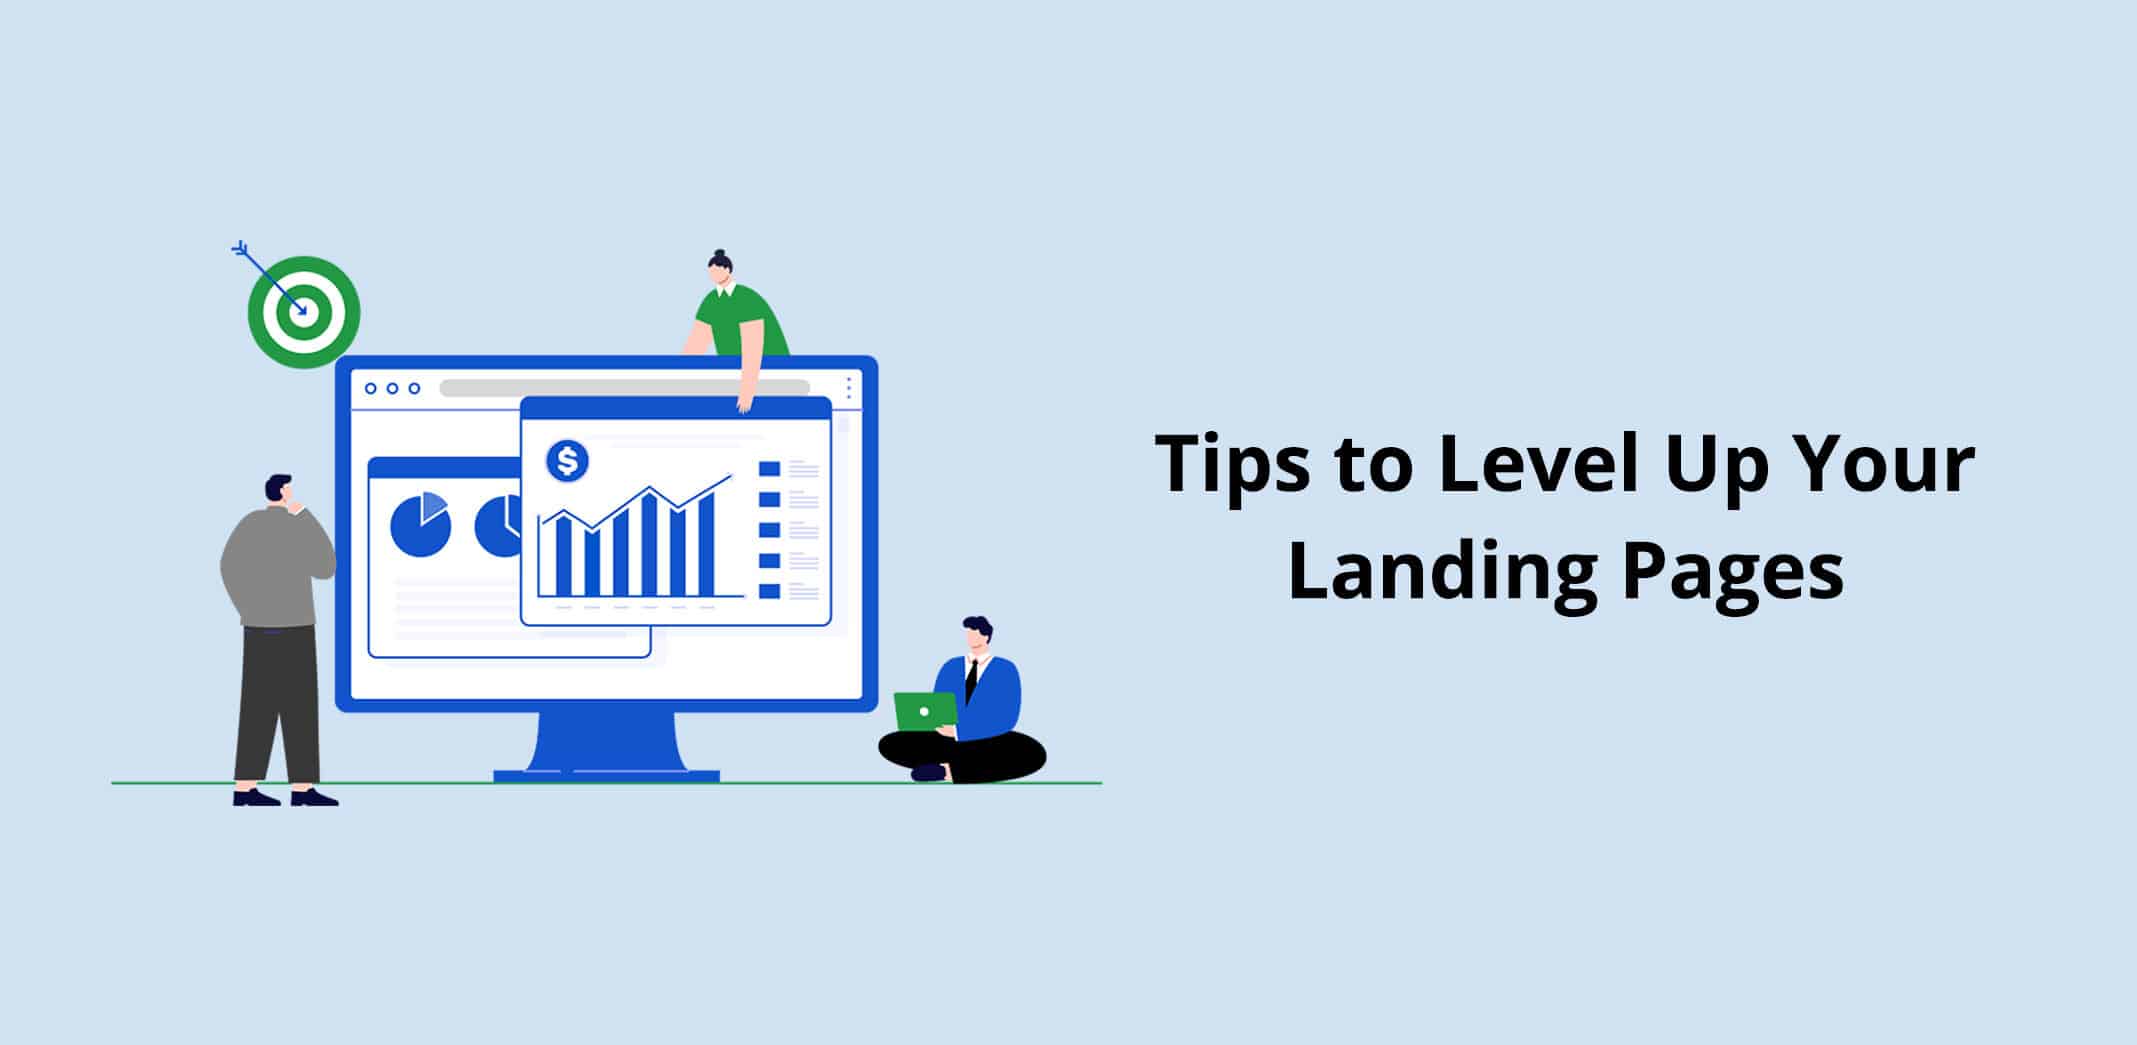 Tips to Level Up Your Landing Pages